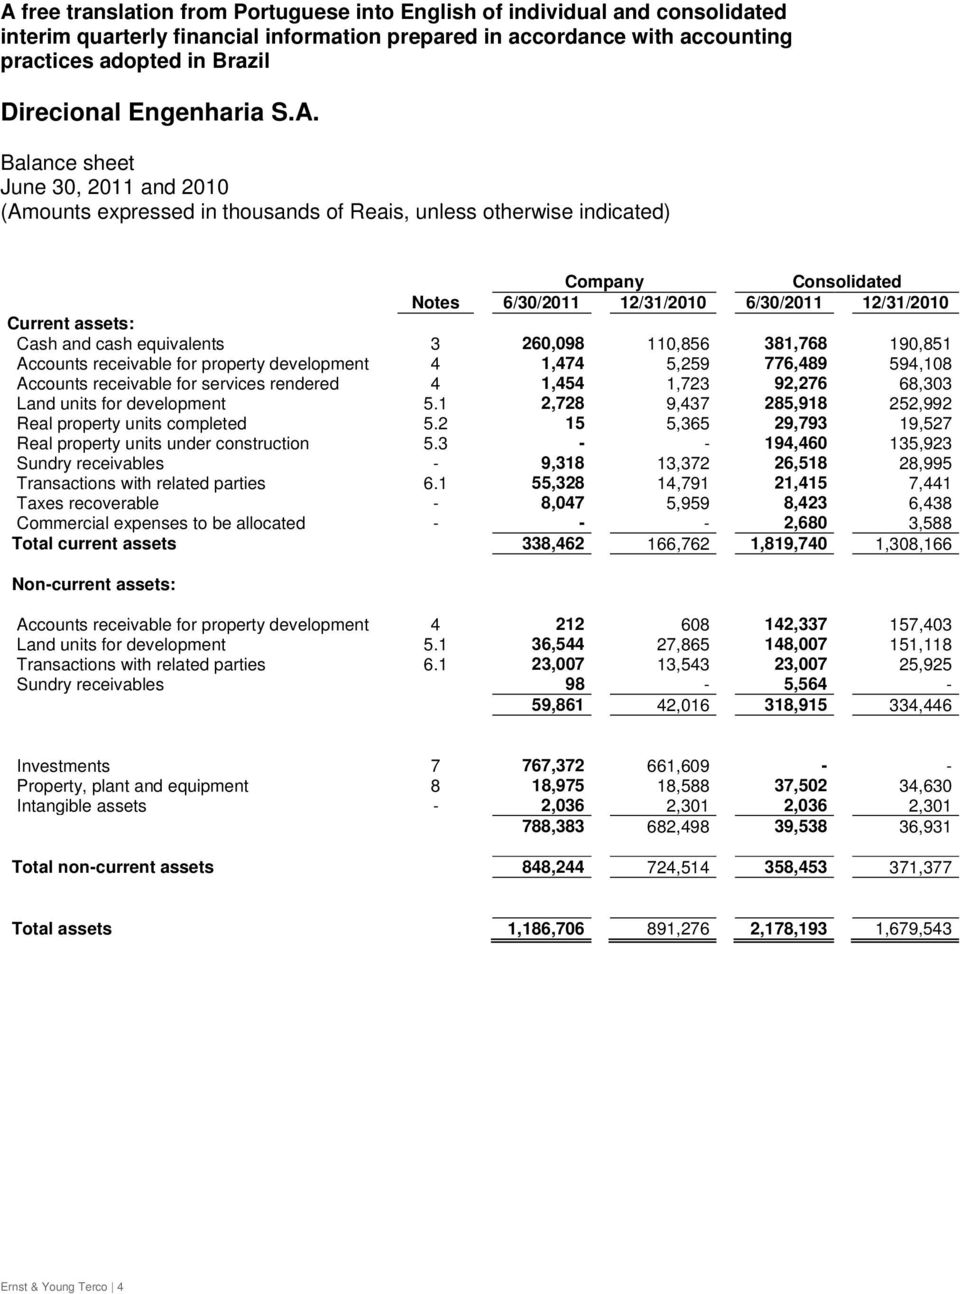 Balance sheet Company Consolidated Notes 6/30/2011 12/31/2010 6/30/2011 12/31/2010 Current assets: Cash and cash equivalents 3 260,098 110,856 381,768 190,851 Accounts receivable for property